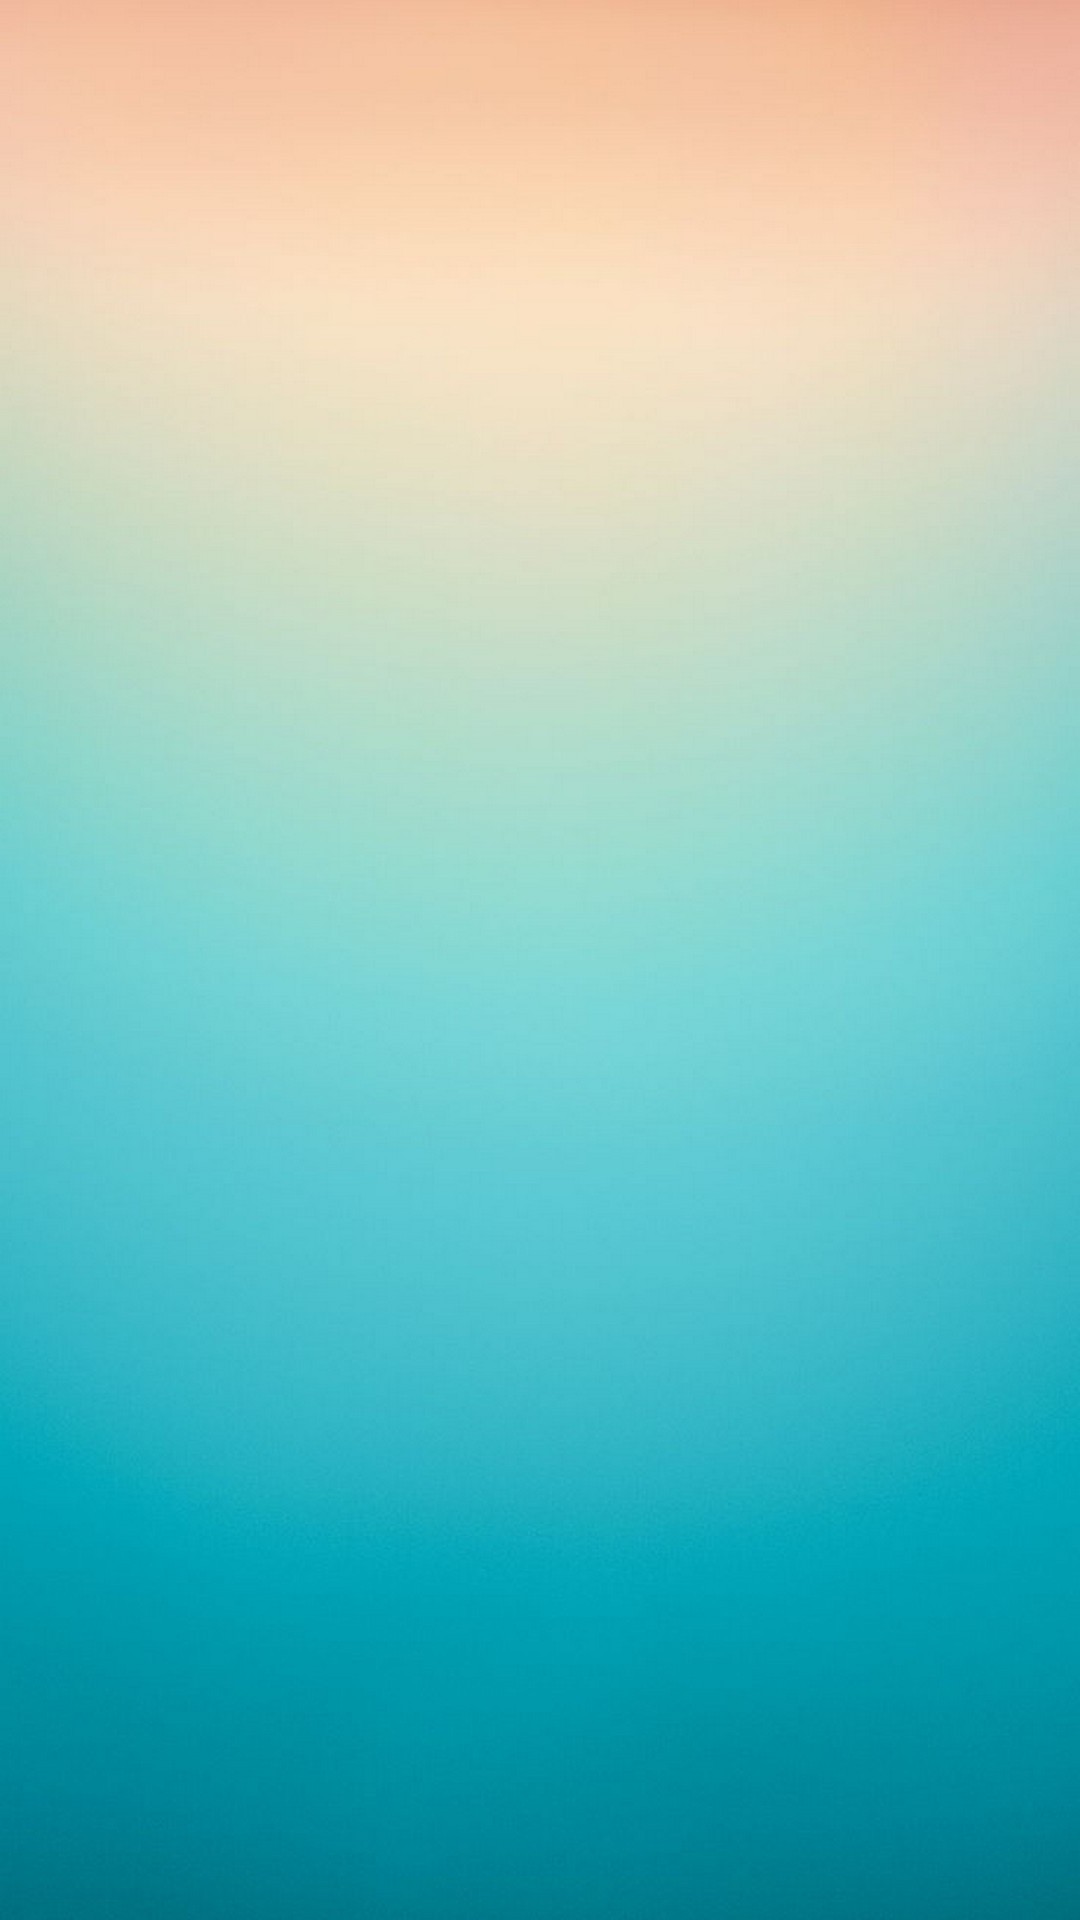 Phones Wallpaper Gradient with high-resolution 1080x1920 pixel. Download all Mobile Wallpapers and Use them as wallpapers for your iPhone, Tablet, iPad, Android and other mobile devices